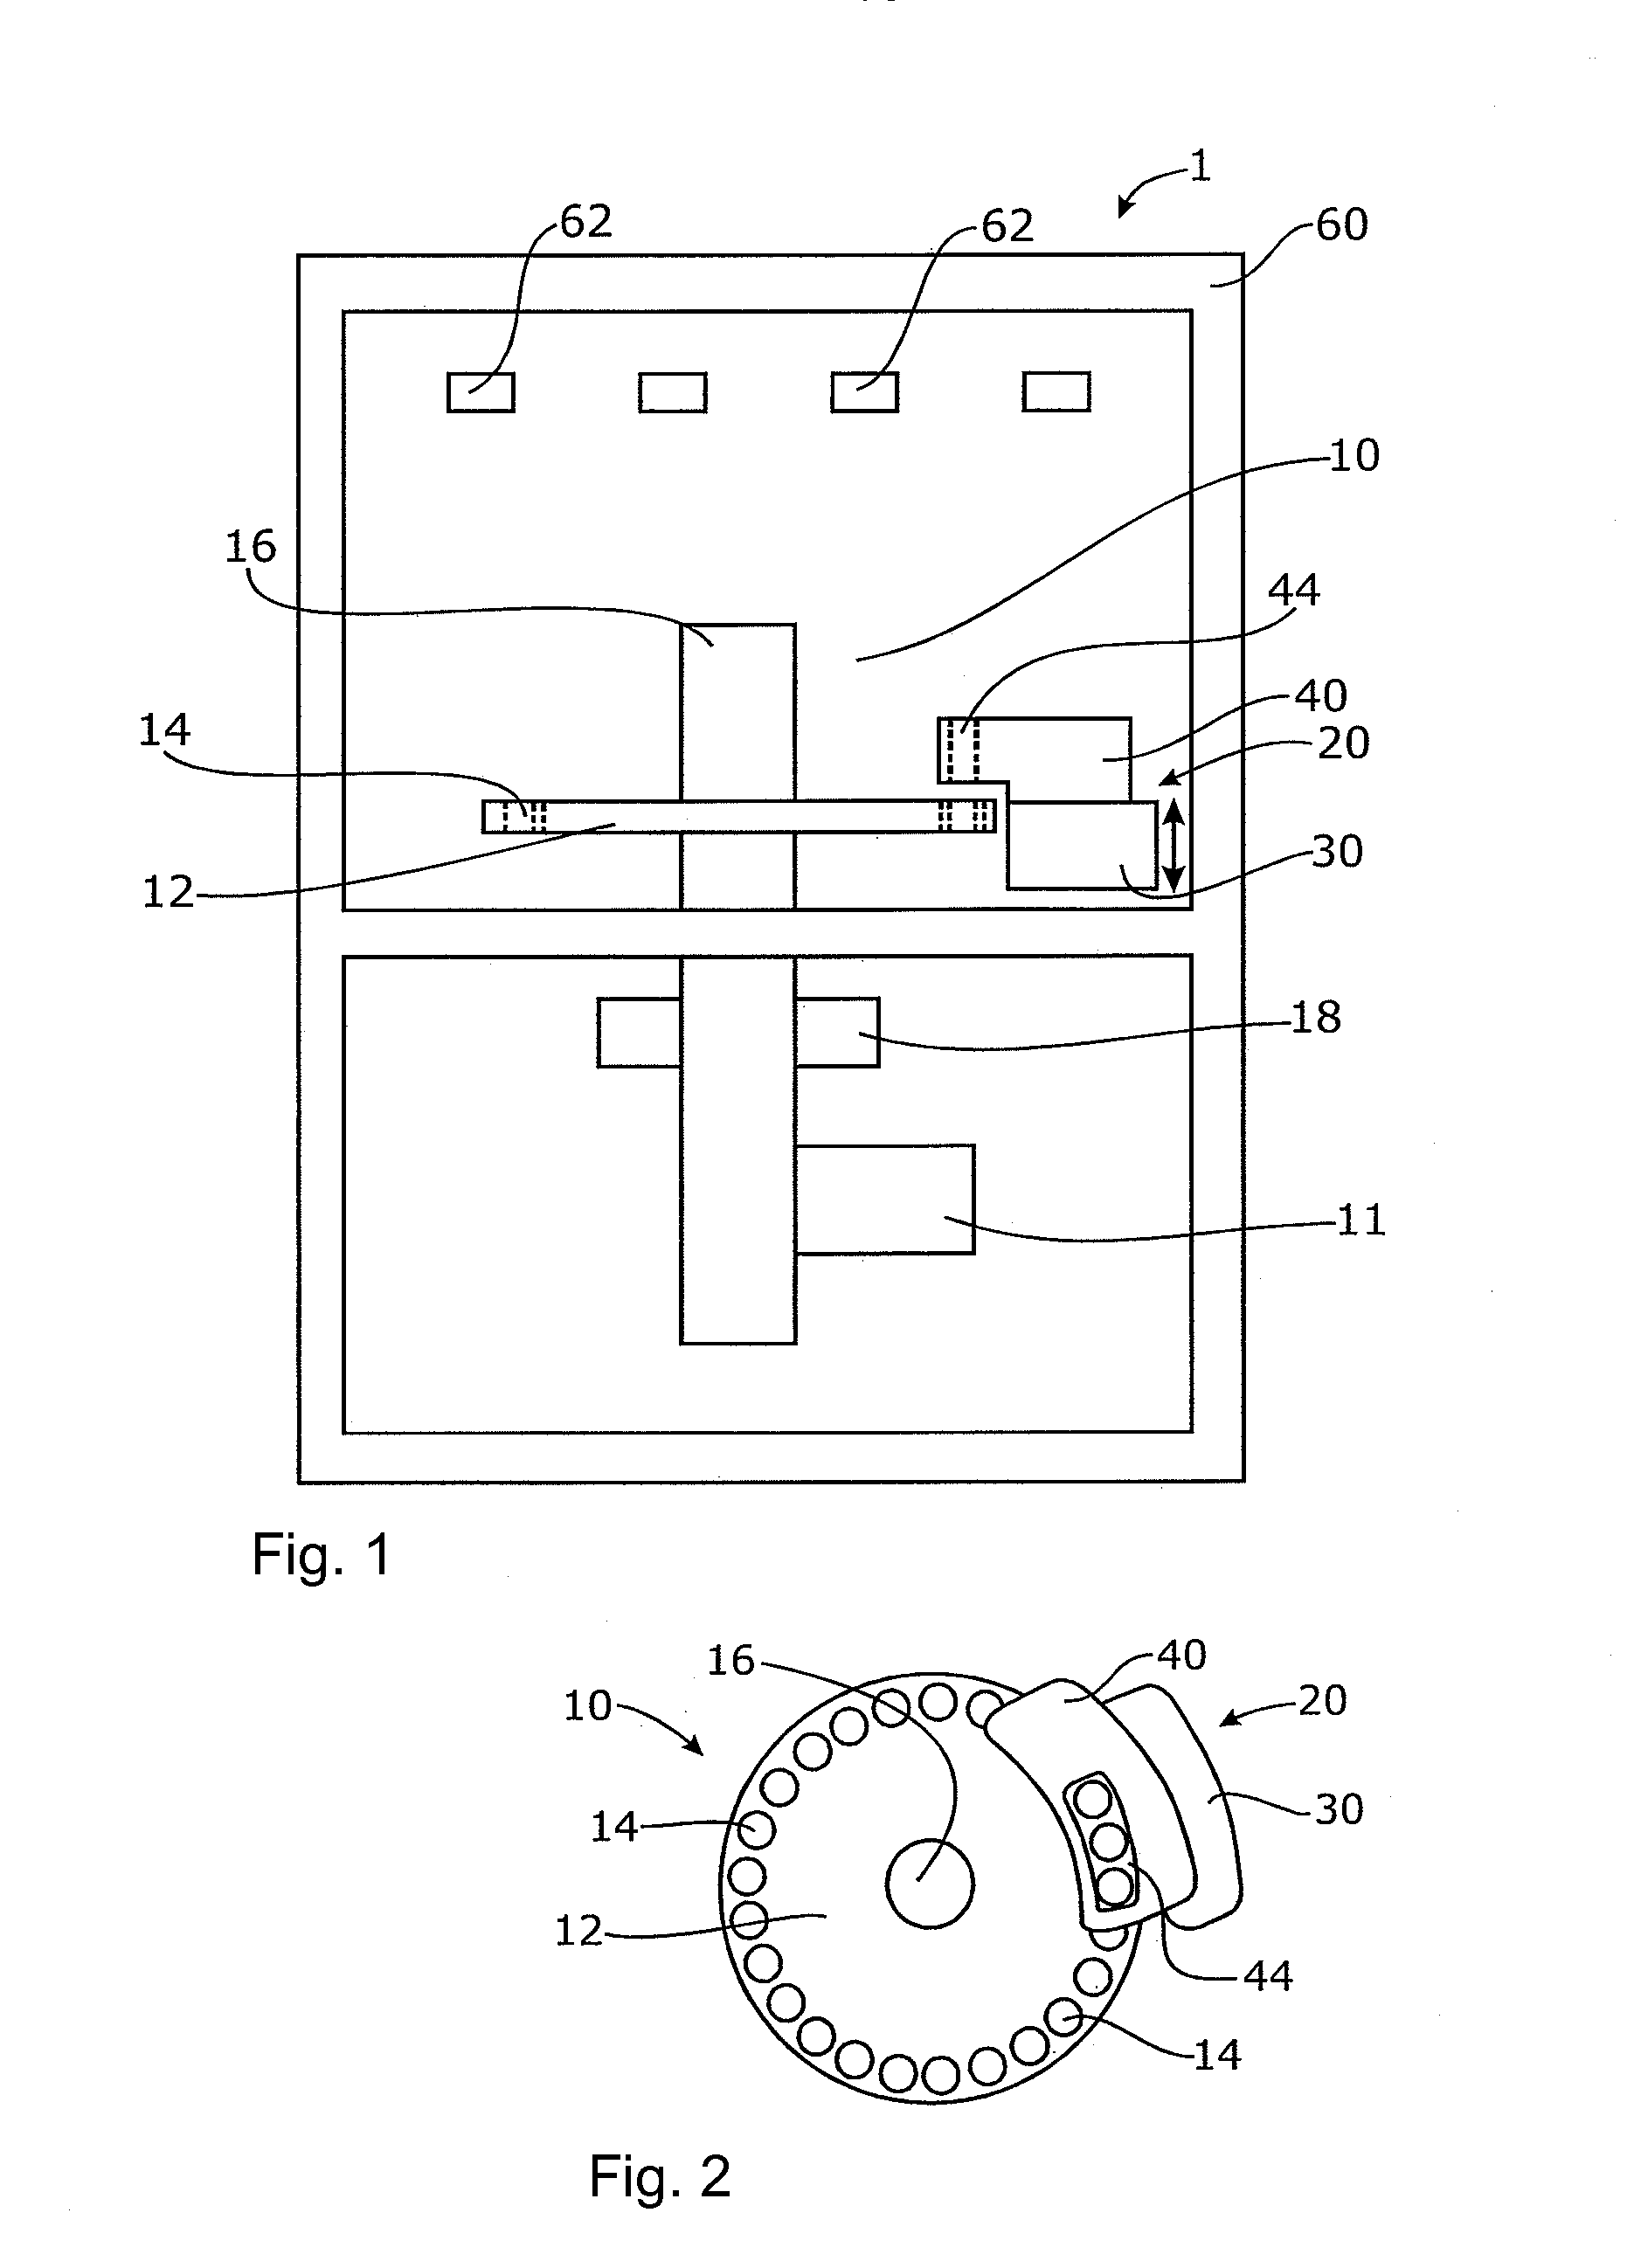 Material Supply for a Tablet Pressing Machine and a Tablet Pressing Machine